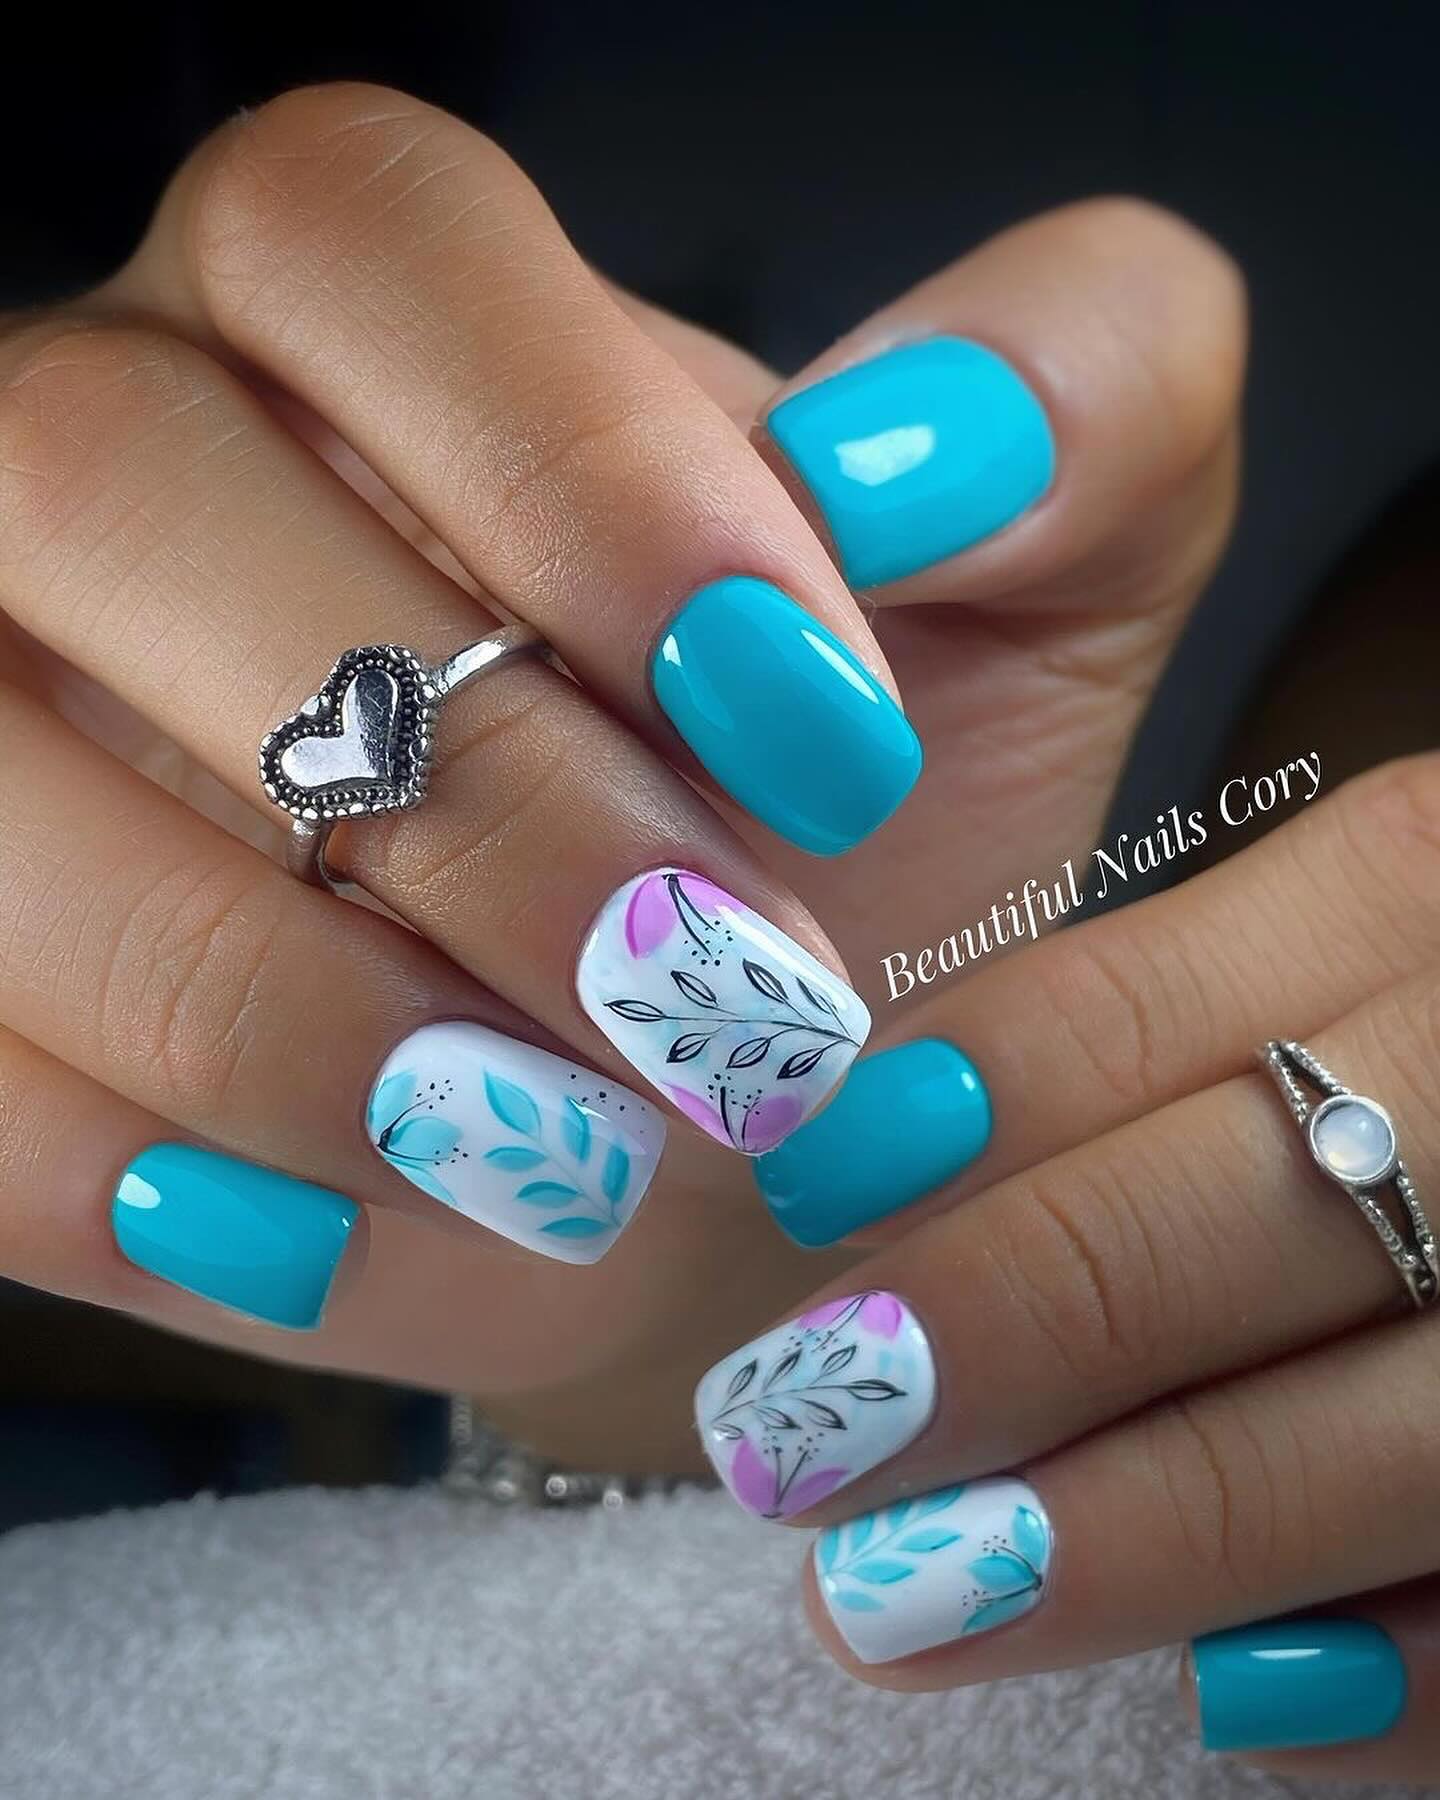 100 Pretty Spring Nail Designs To Try This Year images 99